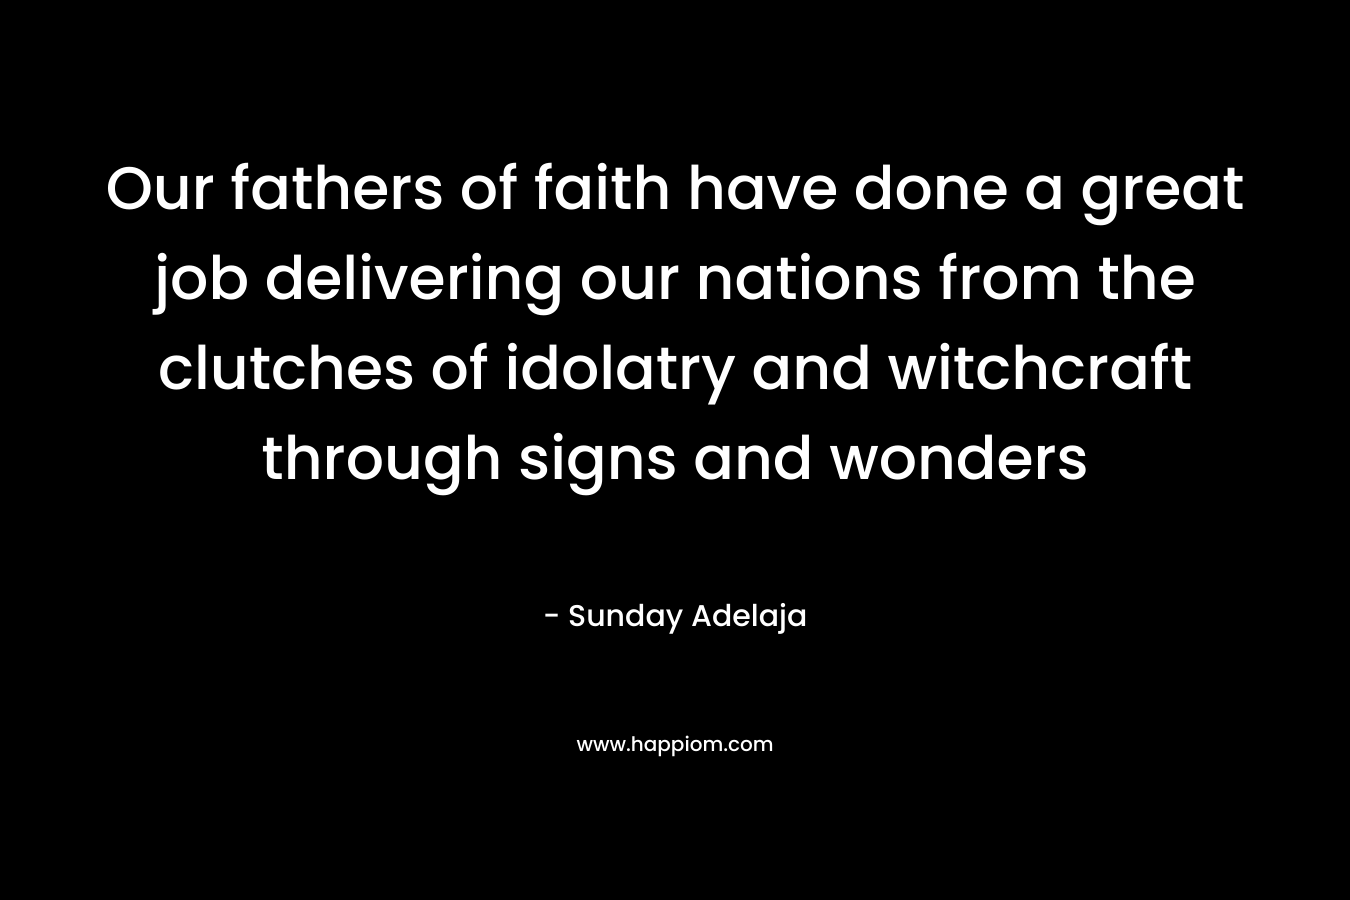 Our fathers of faith have done a great job delivering our nations from the clutches of idolatry and witchcraft through signs and wonders